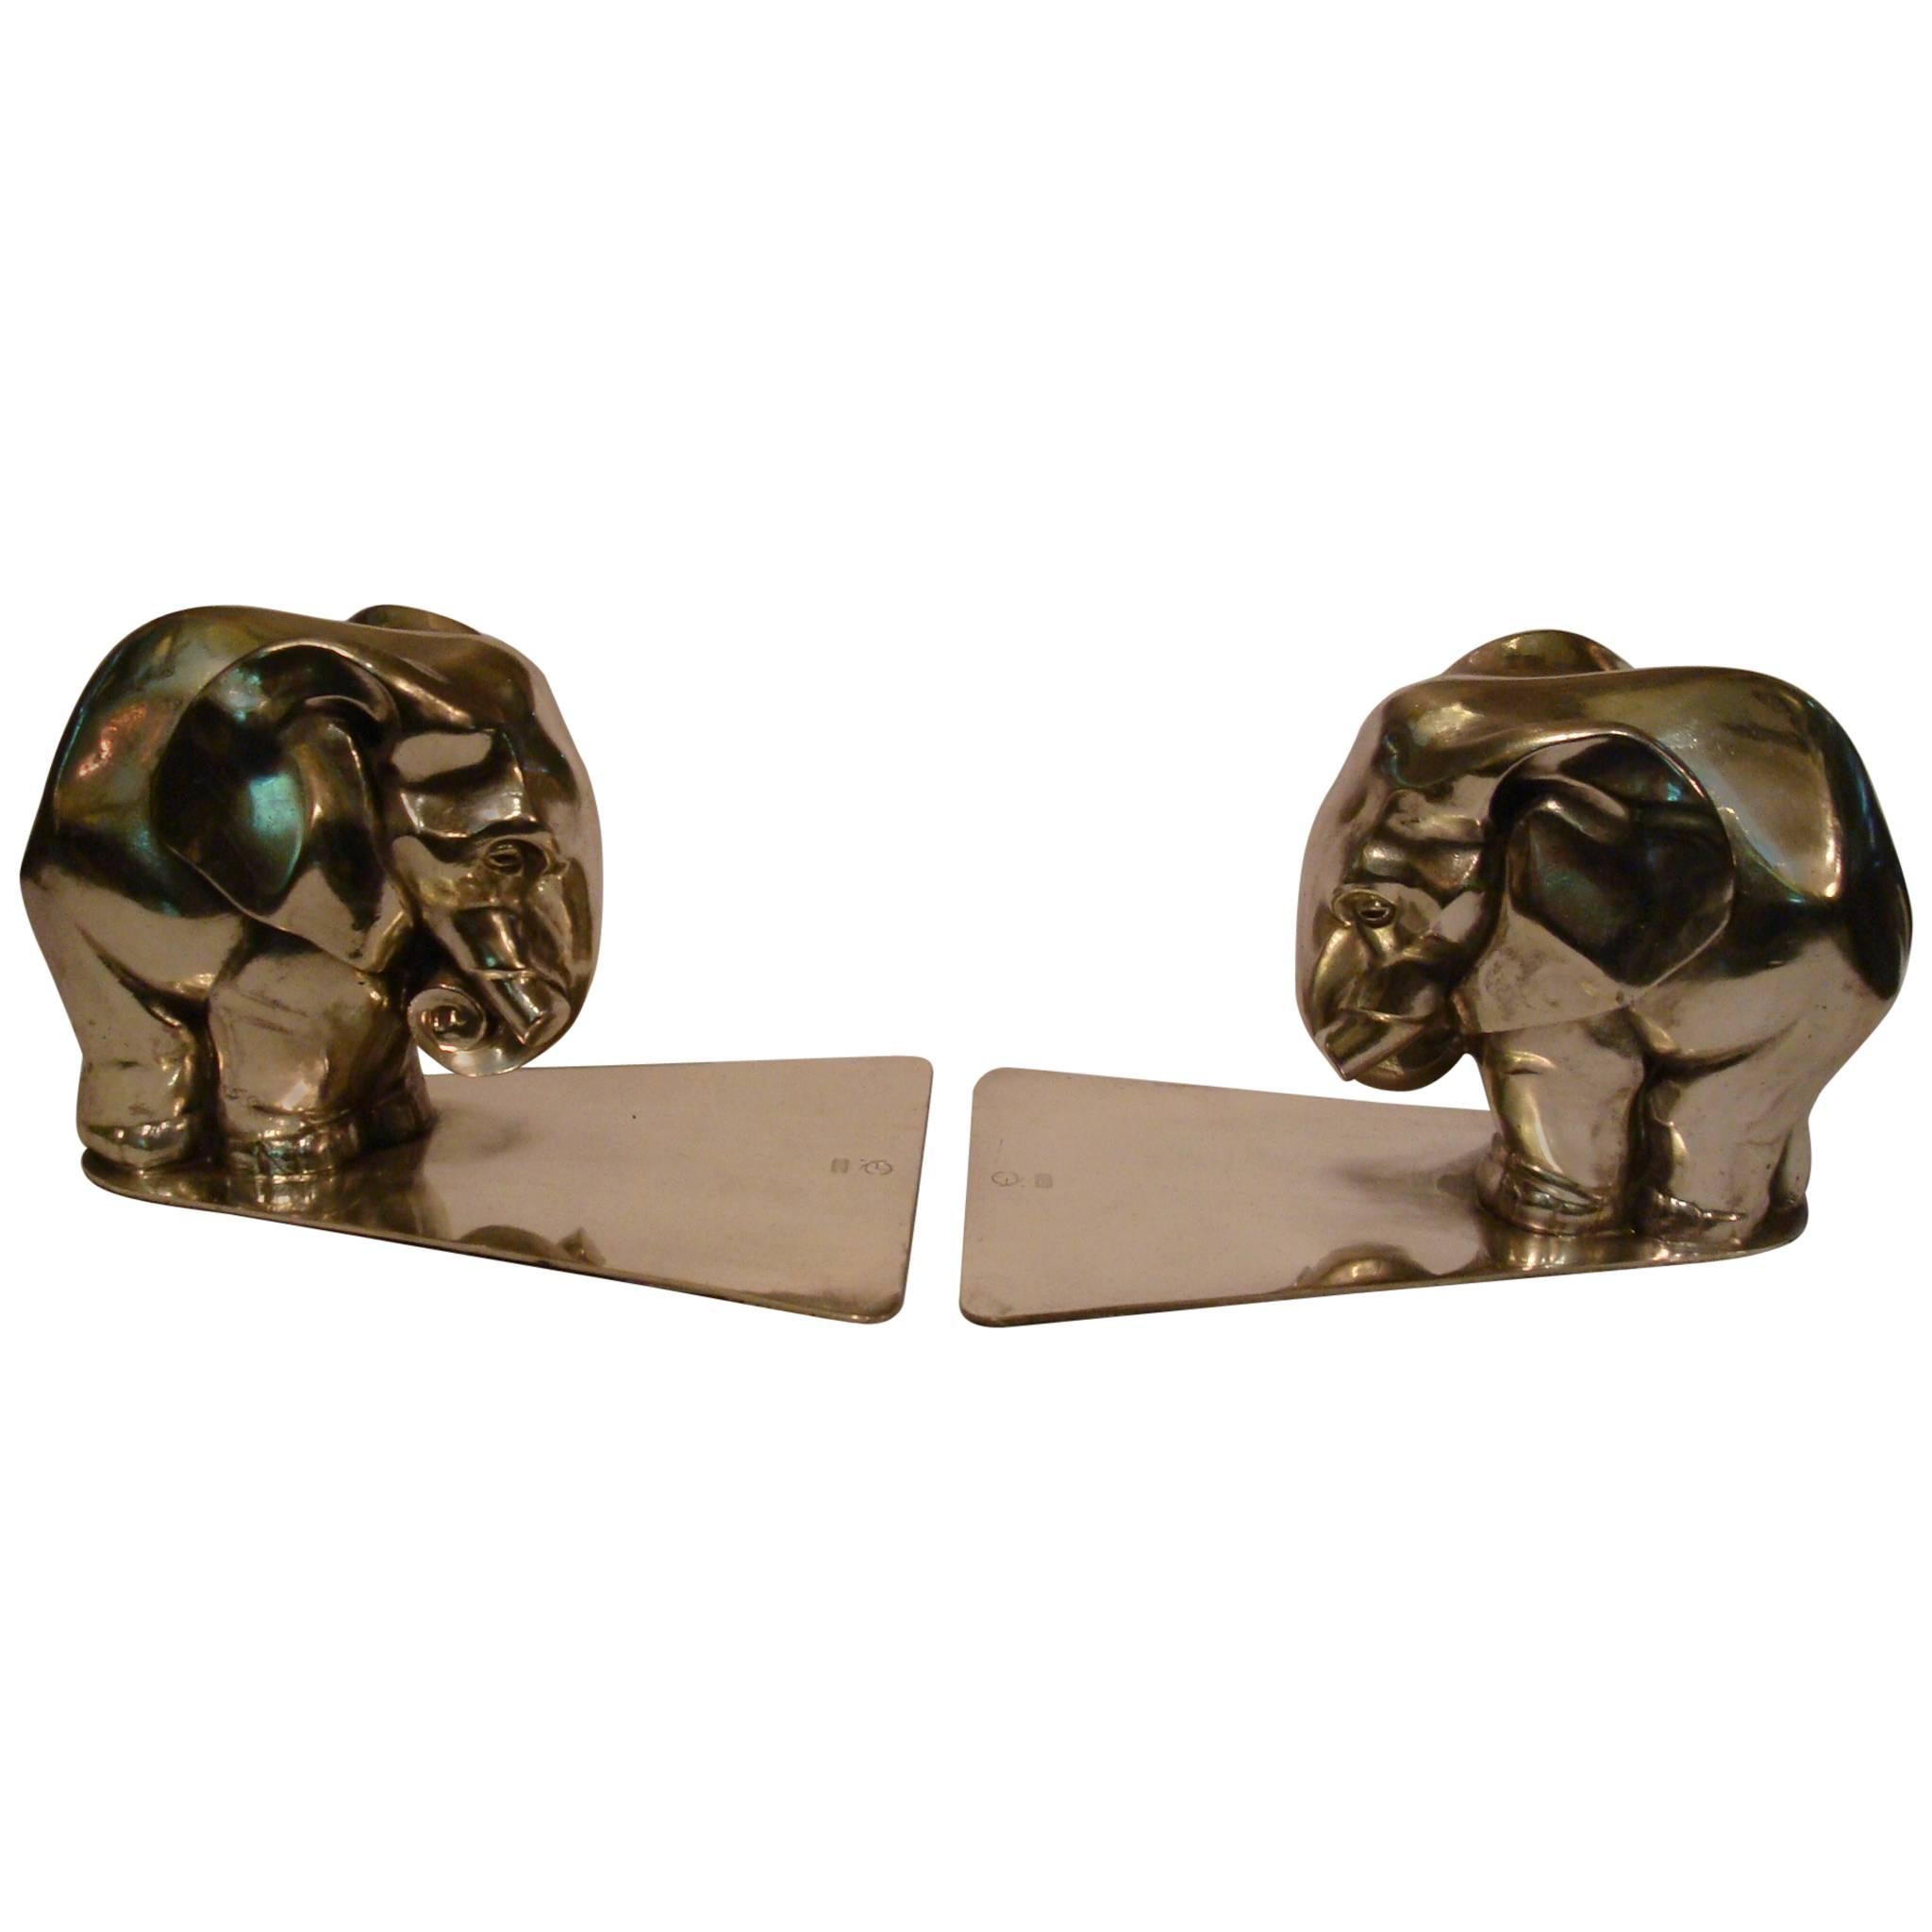 Pair of Art Deco Elephant Bookends by George Nilsson for Gero Holland